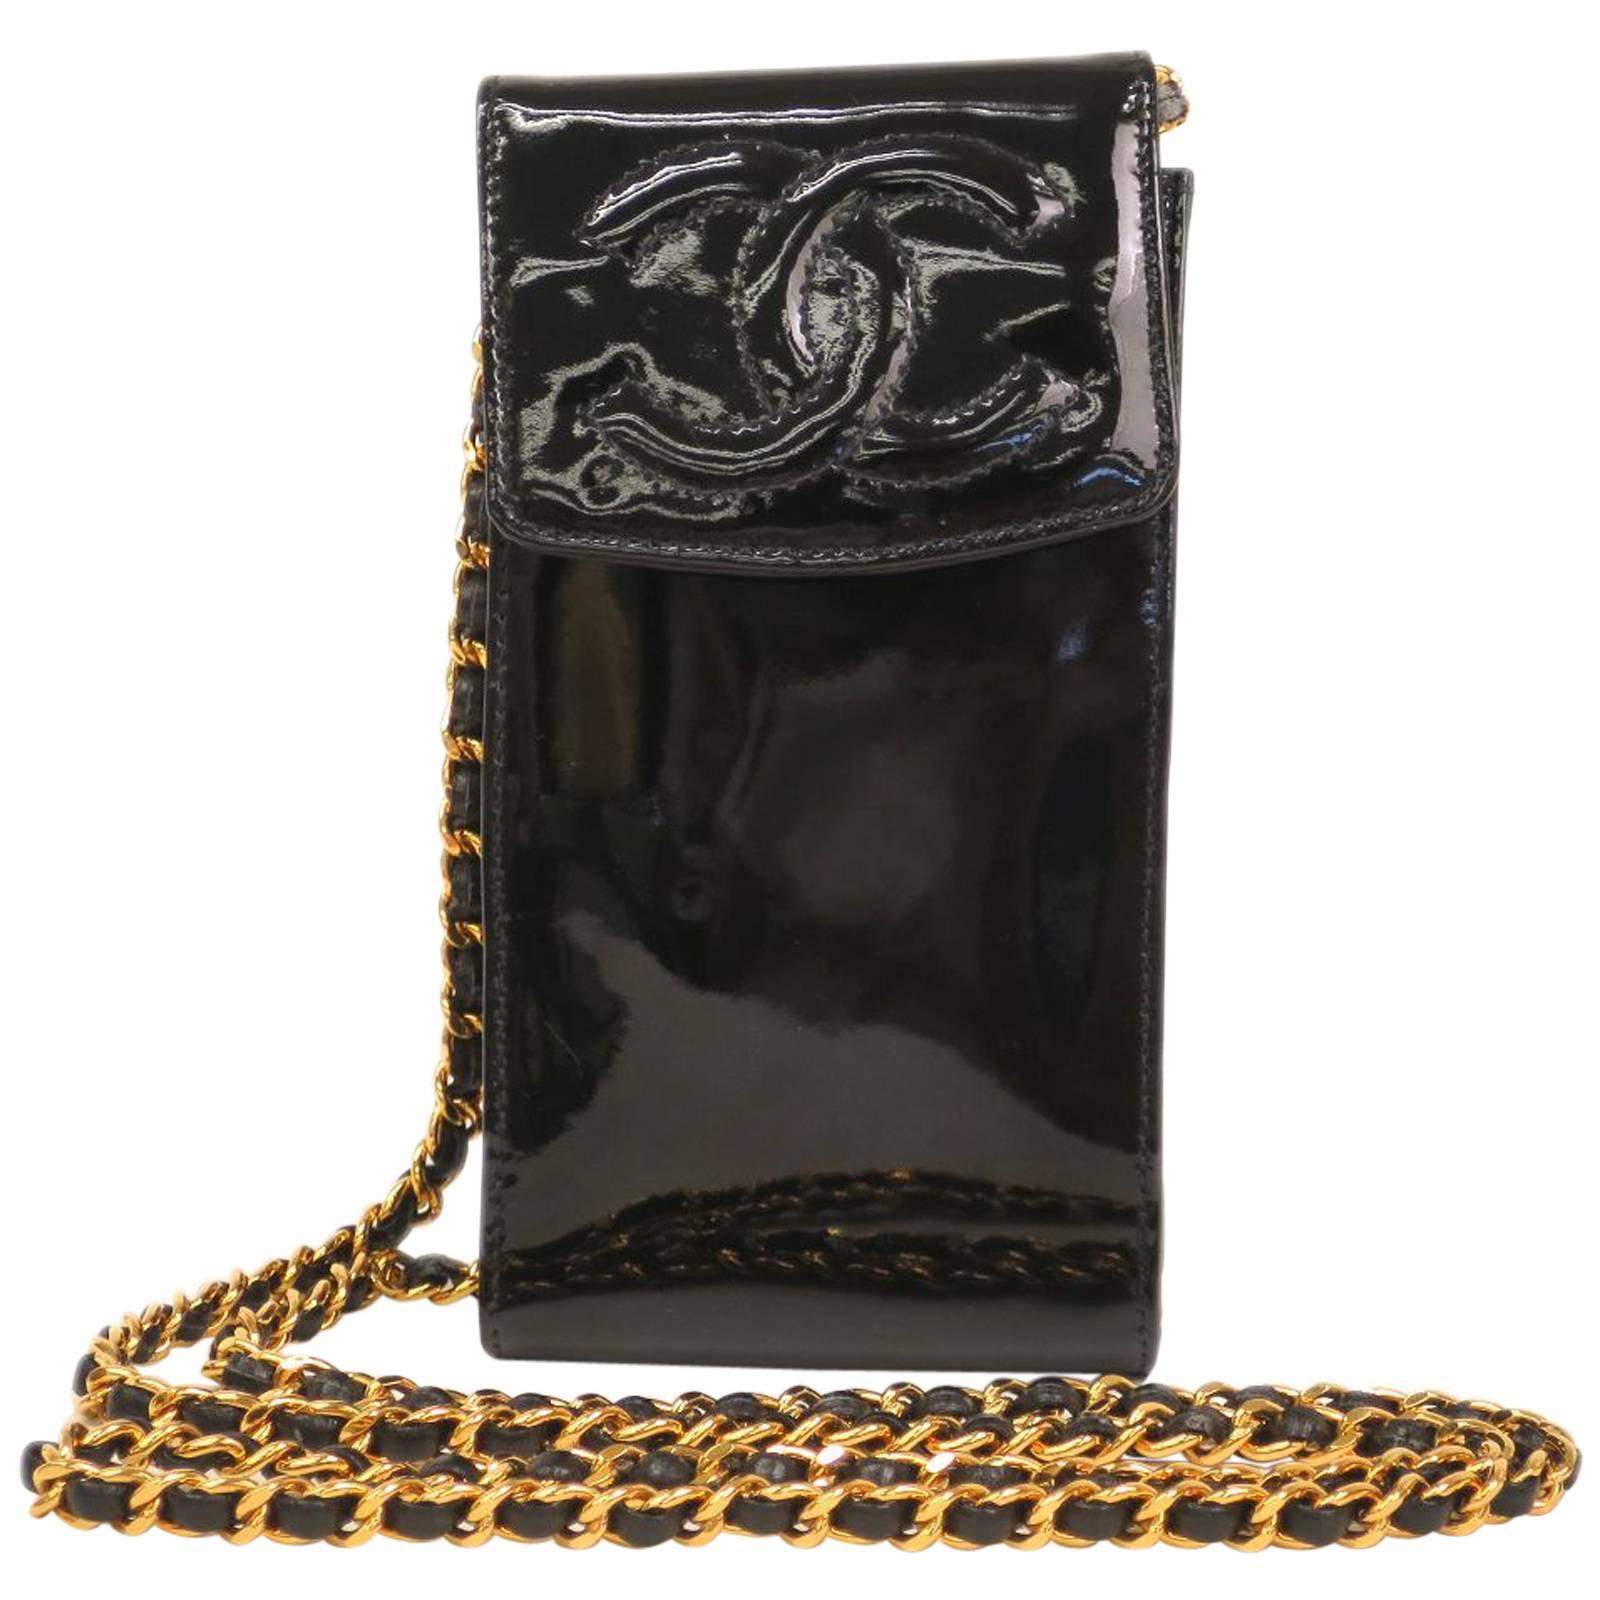 Chanel Black Patent Leather Gold Hardware Mini Cell Phone Crossbody Shoulder Bag